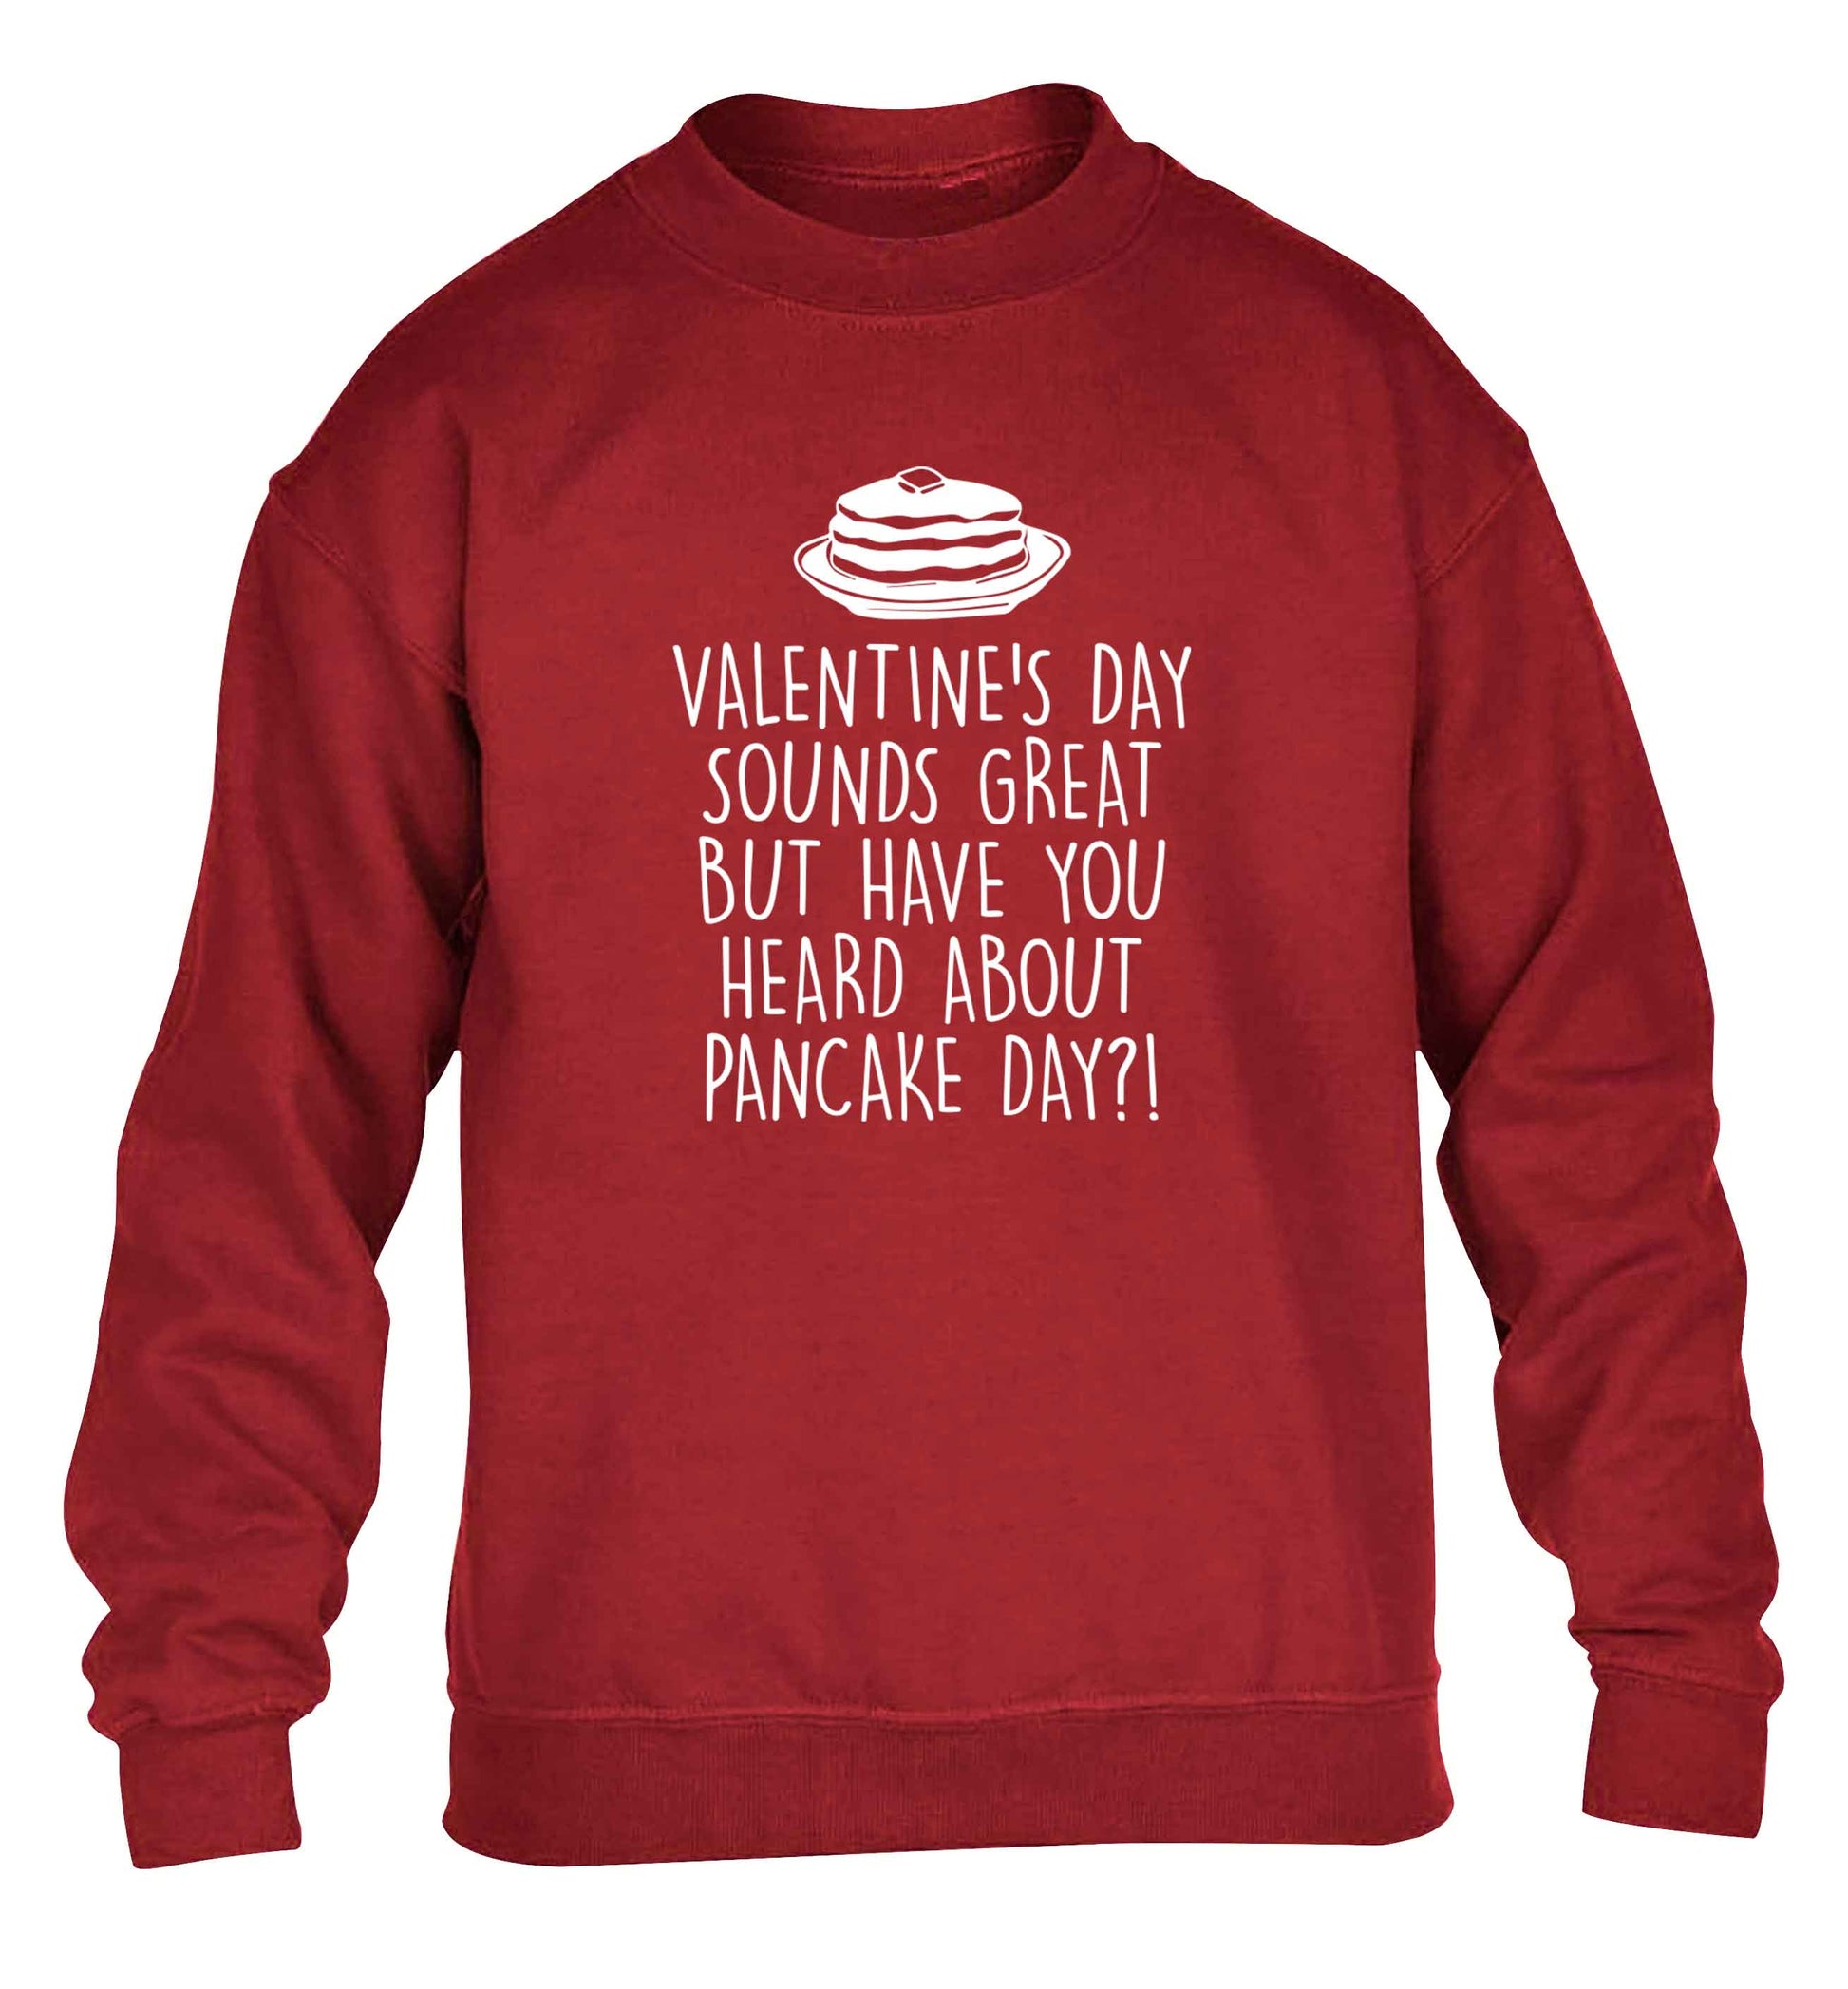 Valentine's day sounds great but have you heard about pancake day?! children's grey sweater 12-13 Years